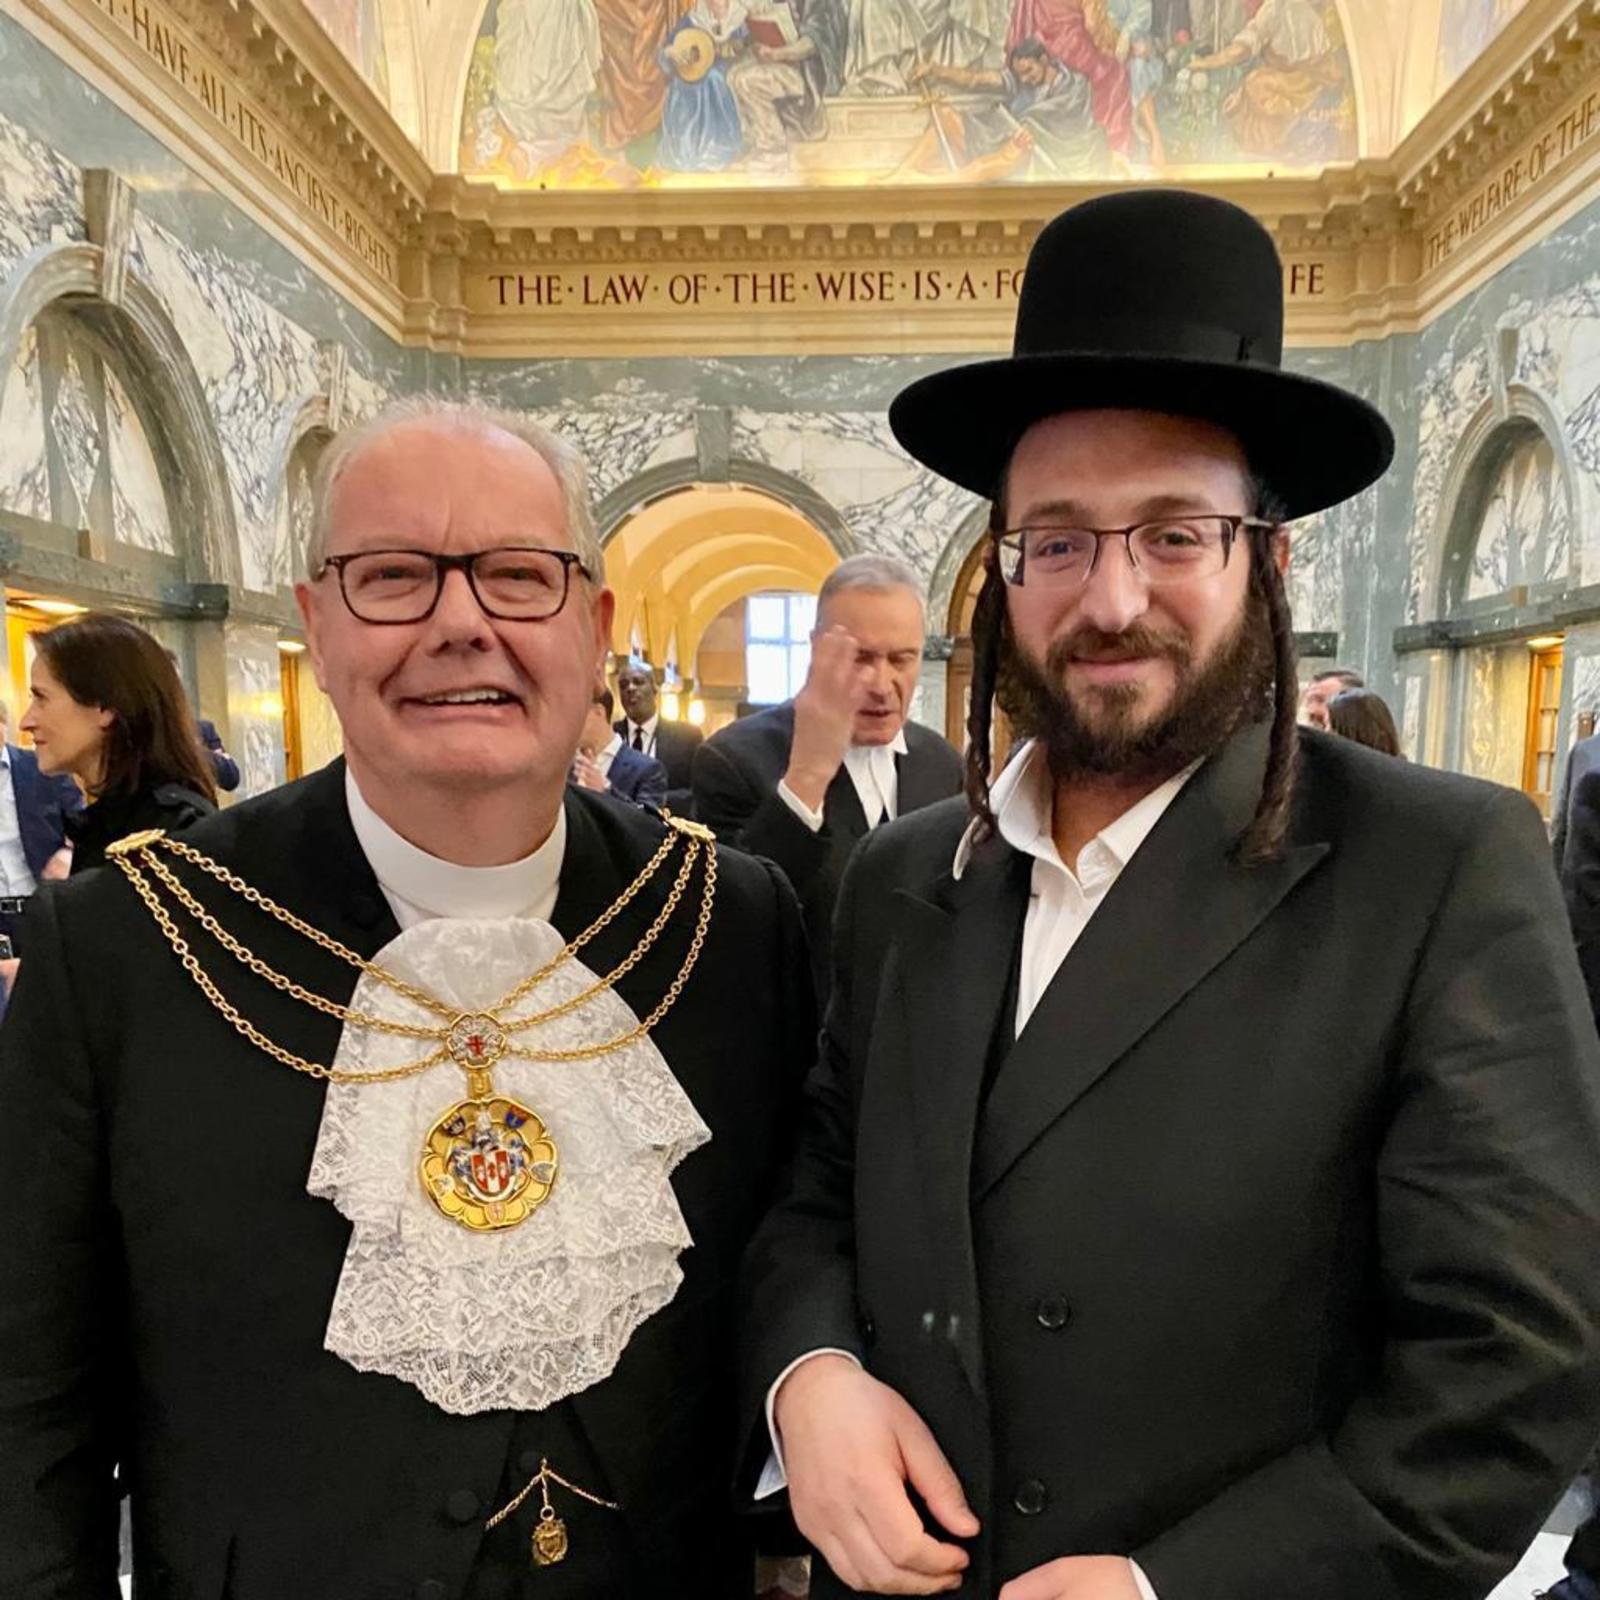 30 Mar 23 - Delighted to attend the Jewish Leadership Evening to mark the centuries long contribution of The City’s Jewish community to its success